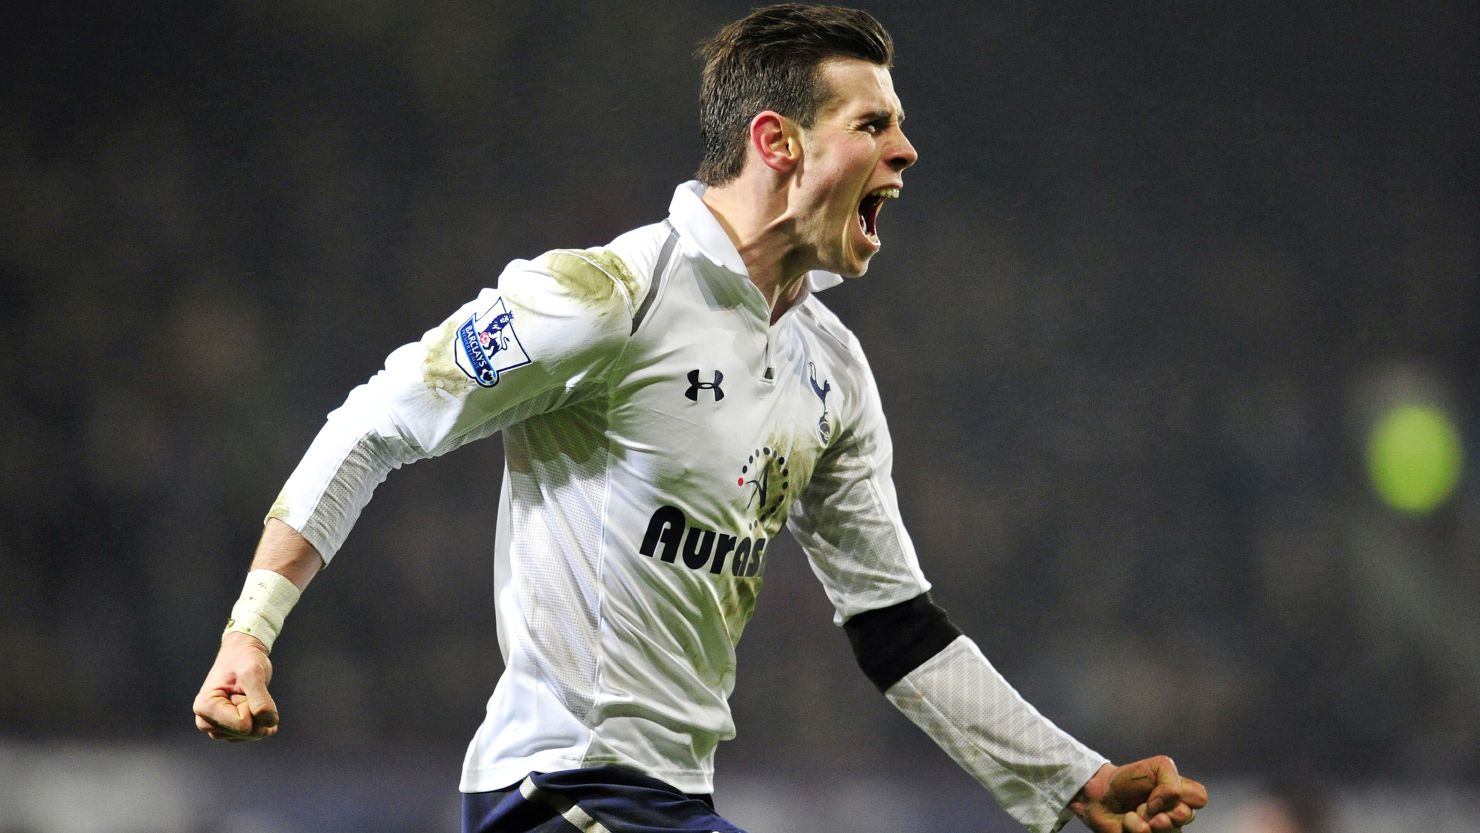 Gareth Bale celebrates his stunning last-minute goal as Spurs come from behind to win 3-2 at West Ham